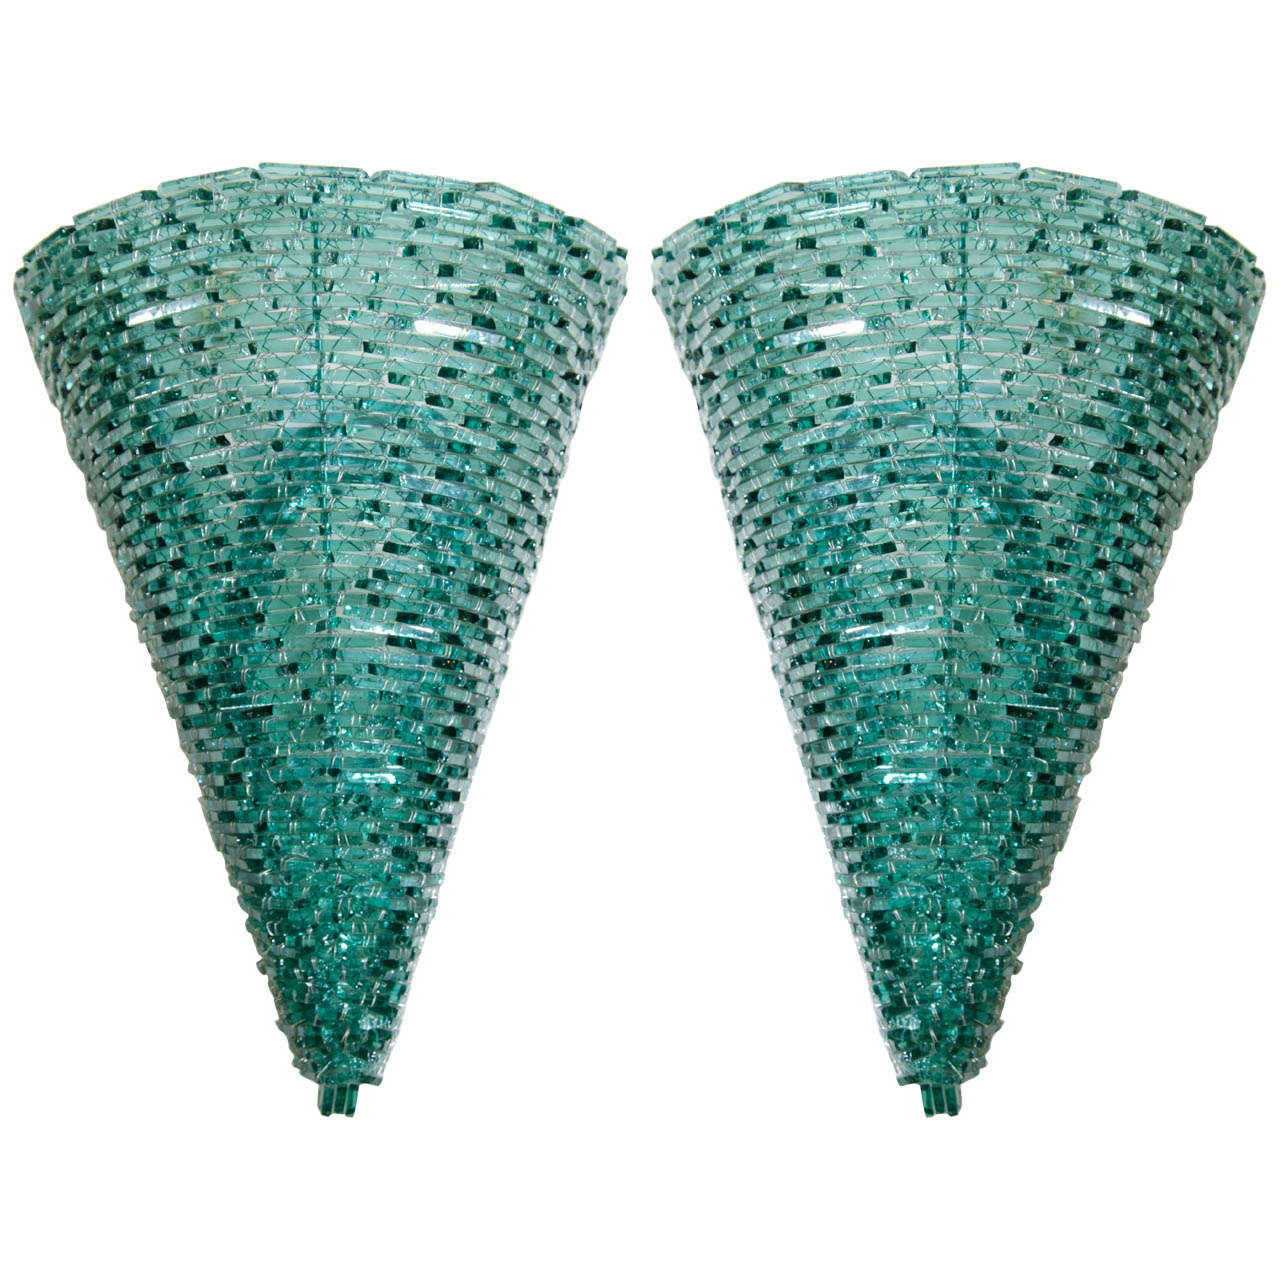 A Mid Century Pair of Glass and Metal Wall Sconces by Tony Duquette